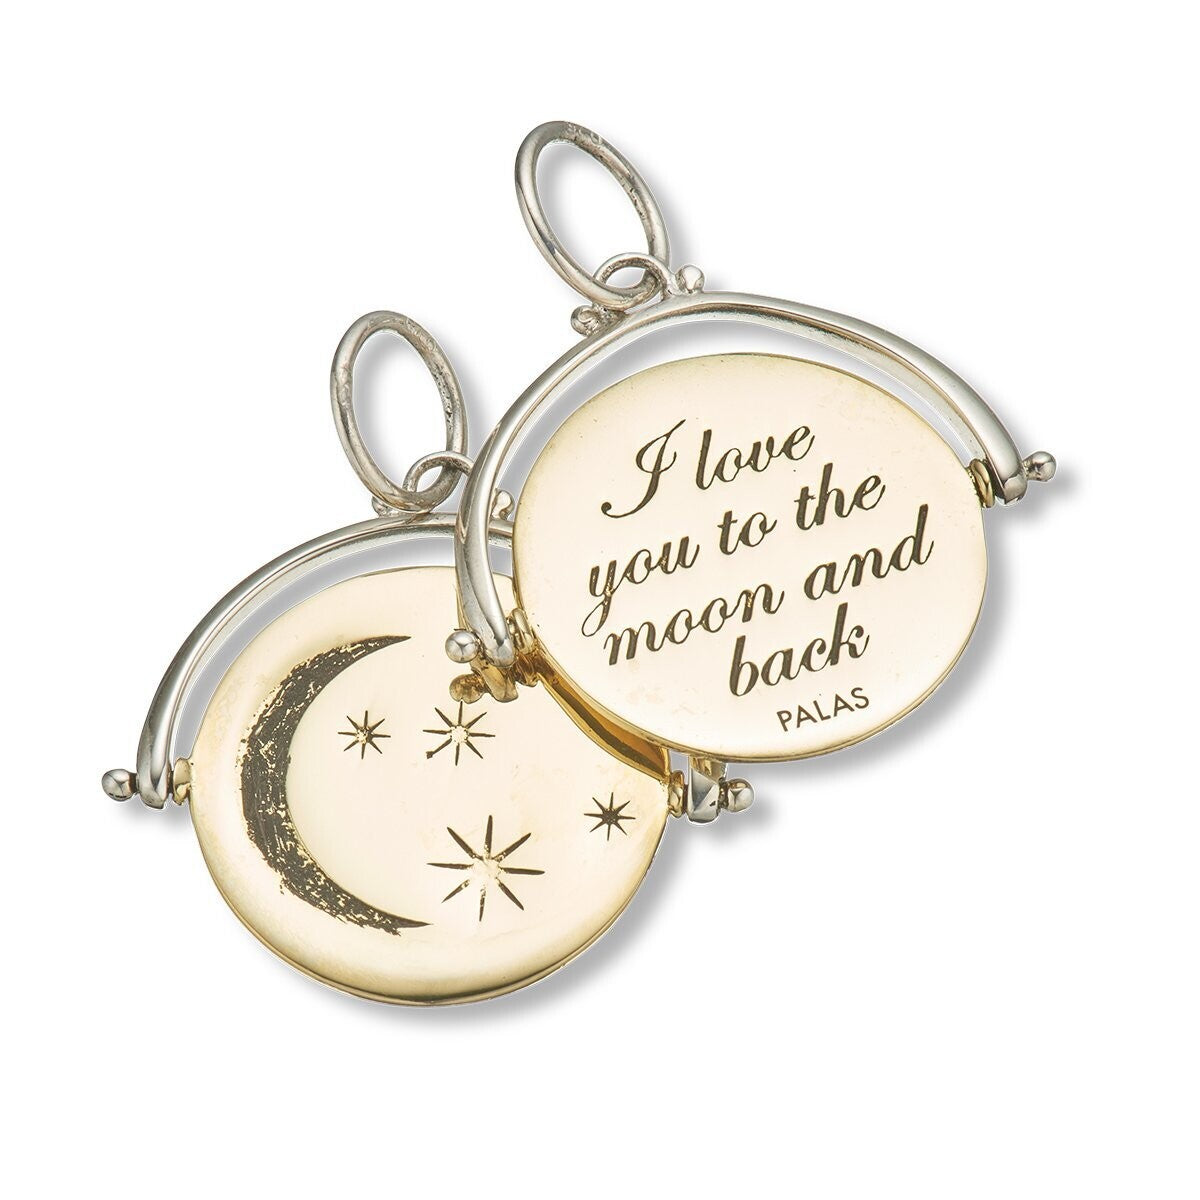 Palas love you to the moon and back charm